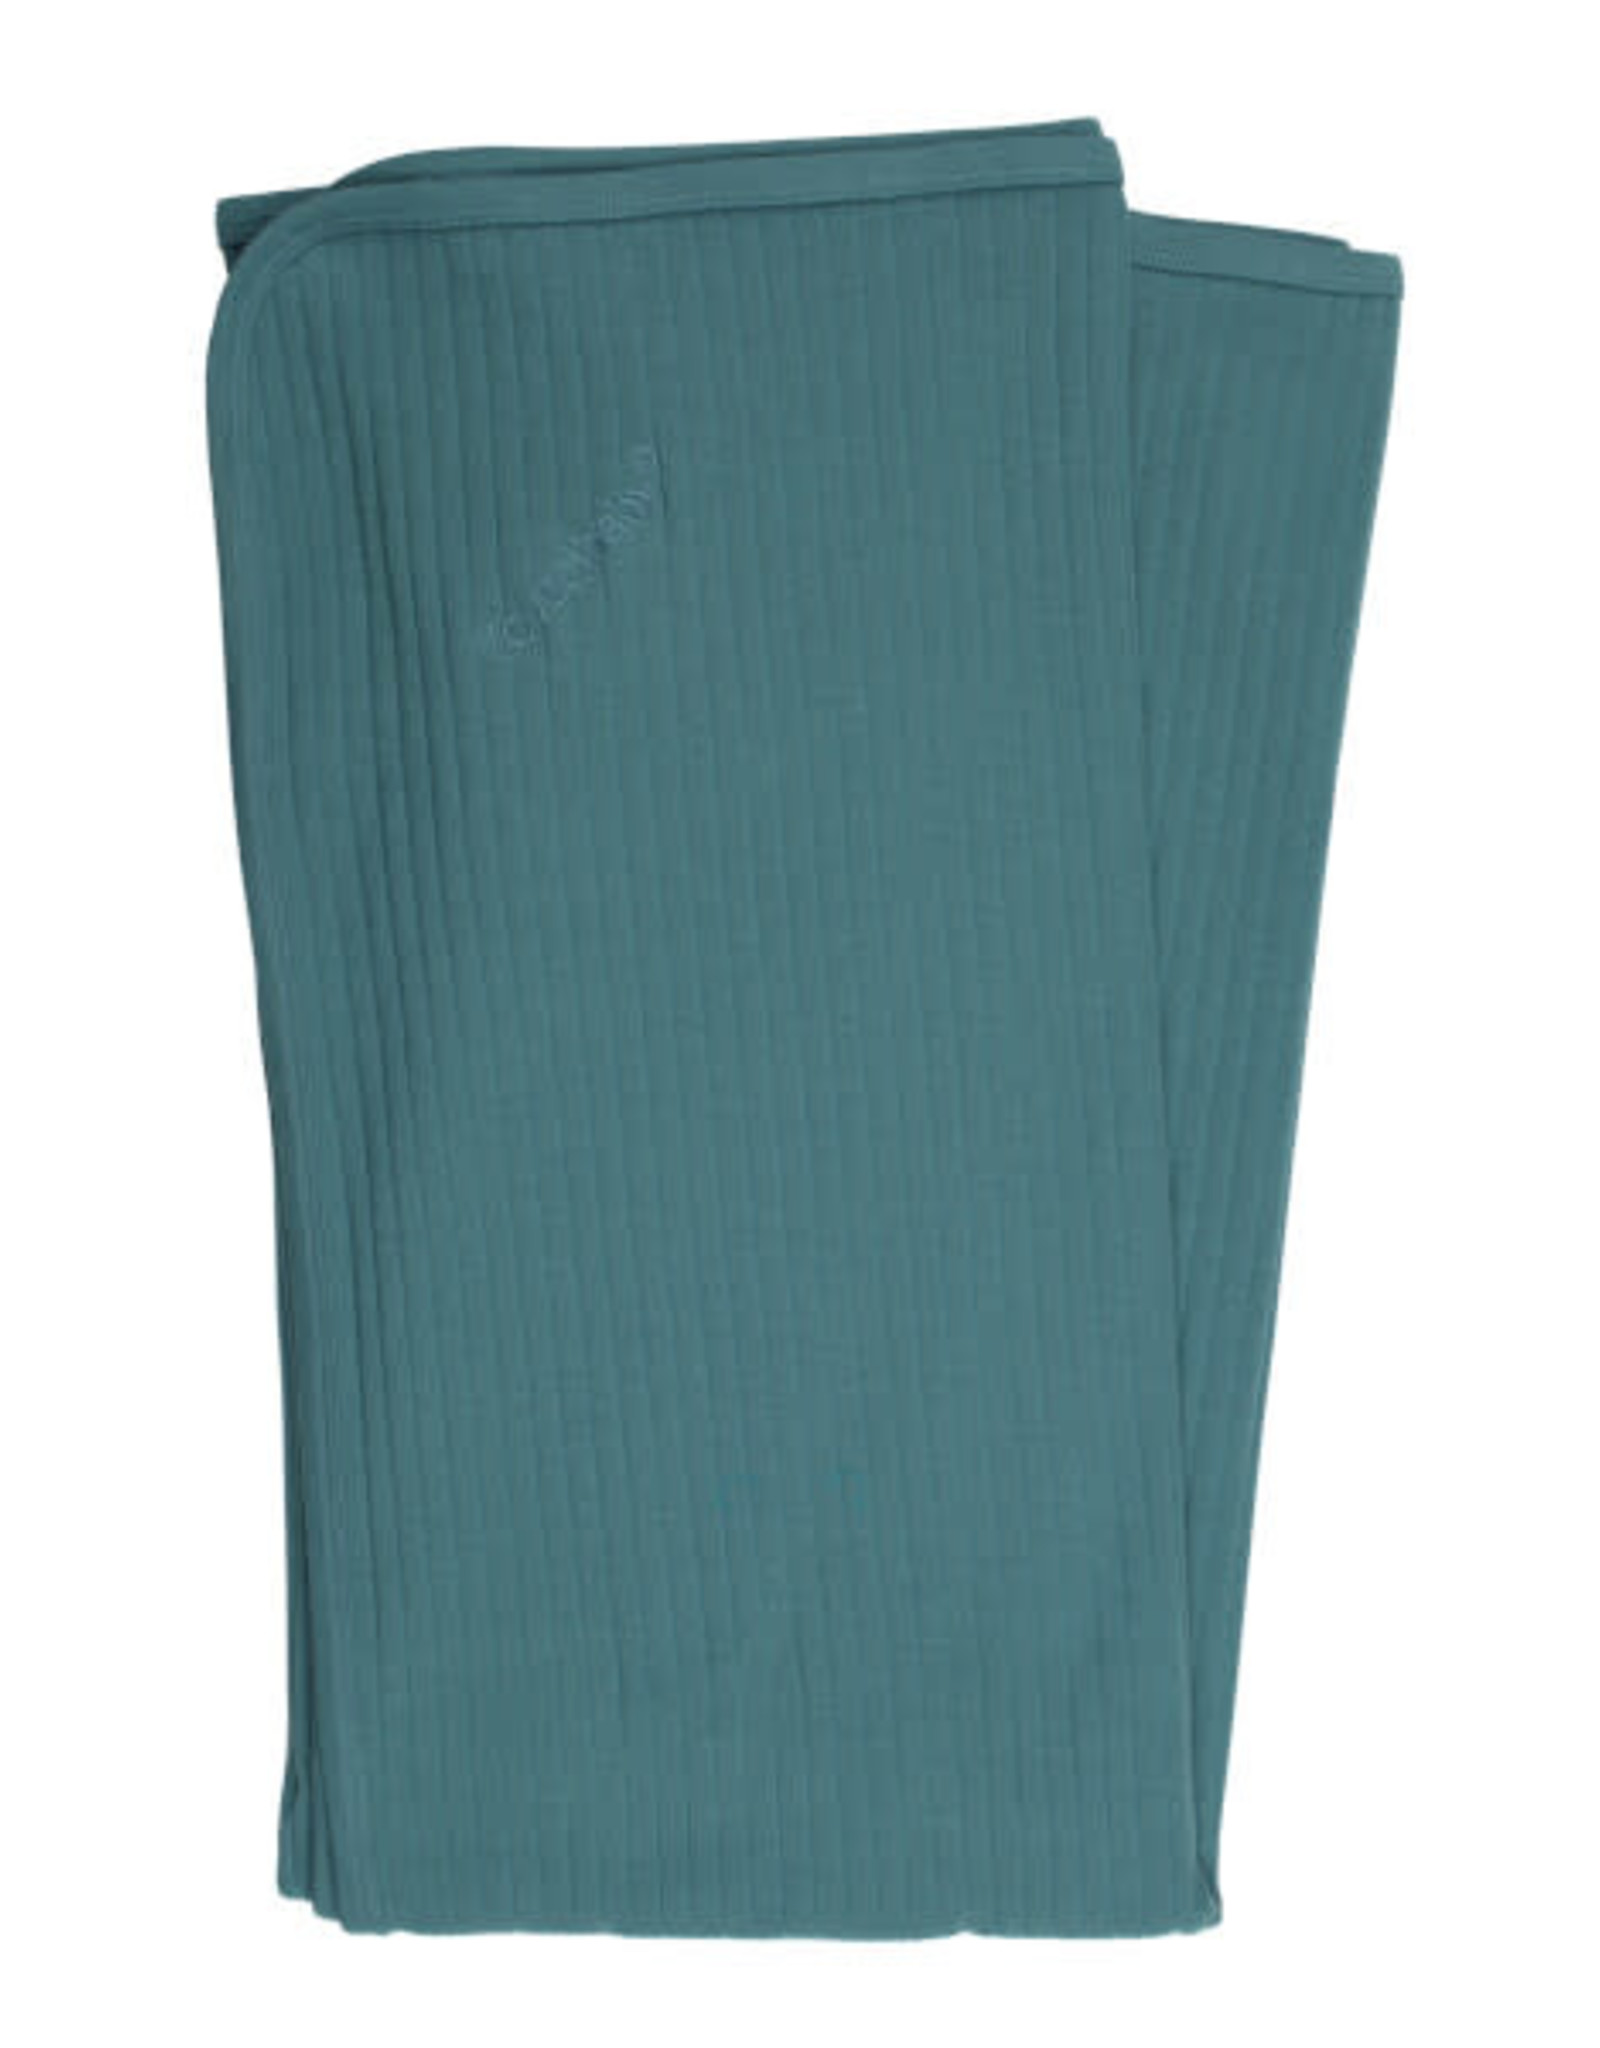 L'oved Baby Ribbed Swaddle Blanket - Oasis